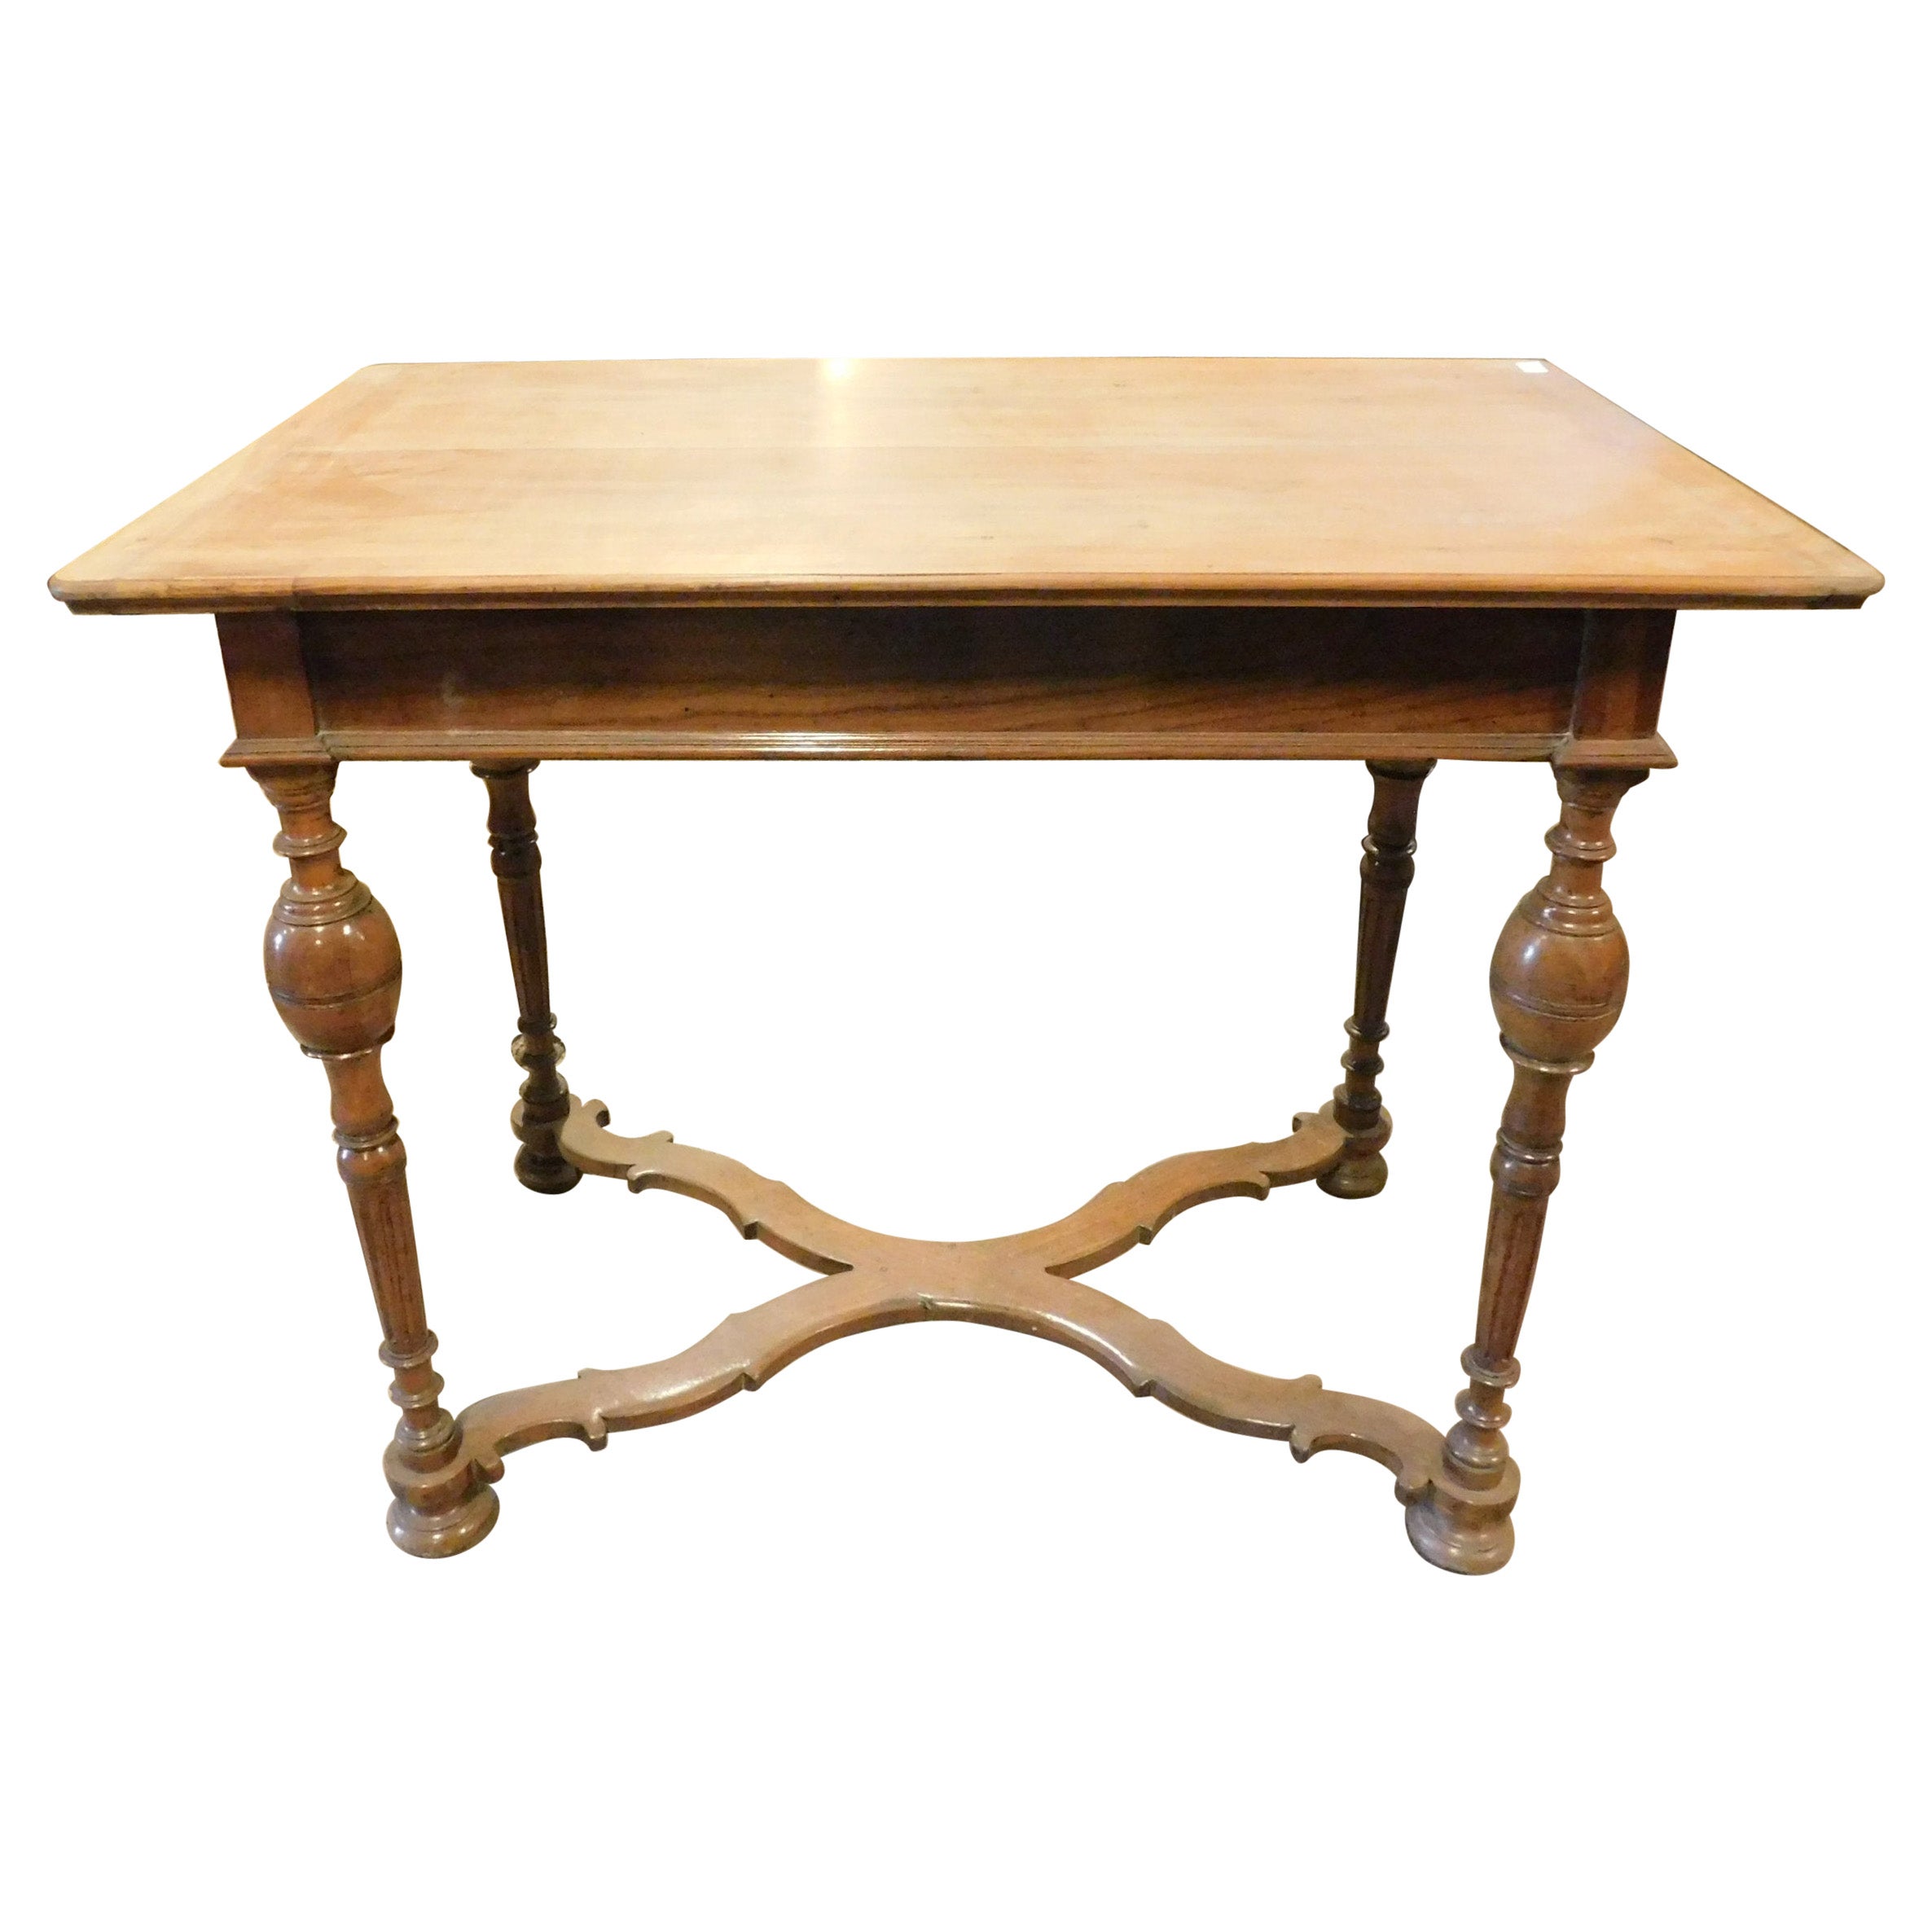 Antique Cherry Wood Table with Hand Carved Legs, 18th Century, Italy